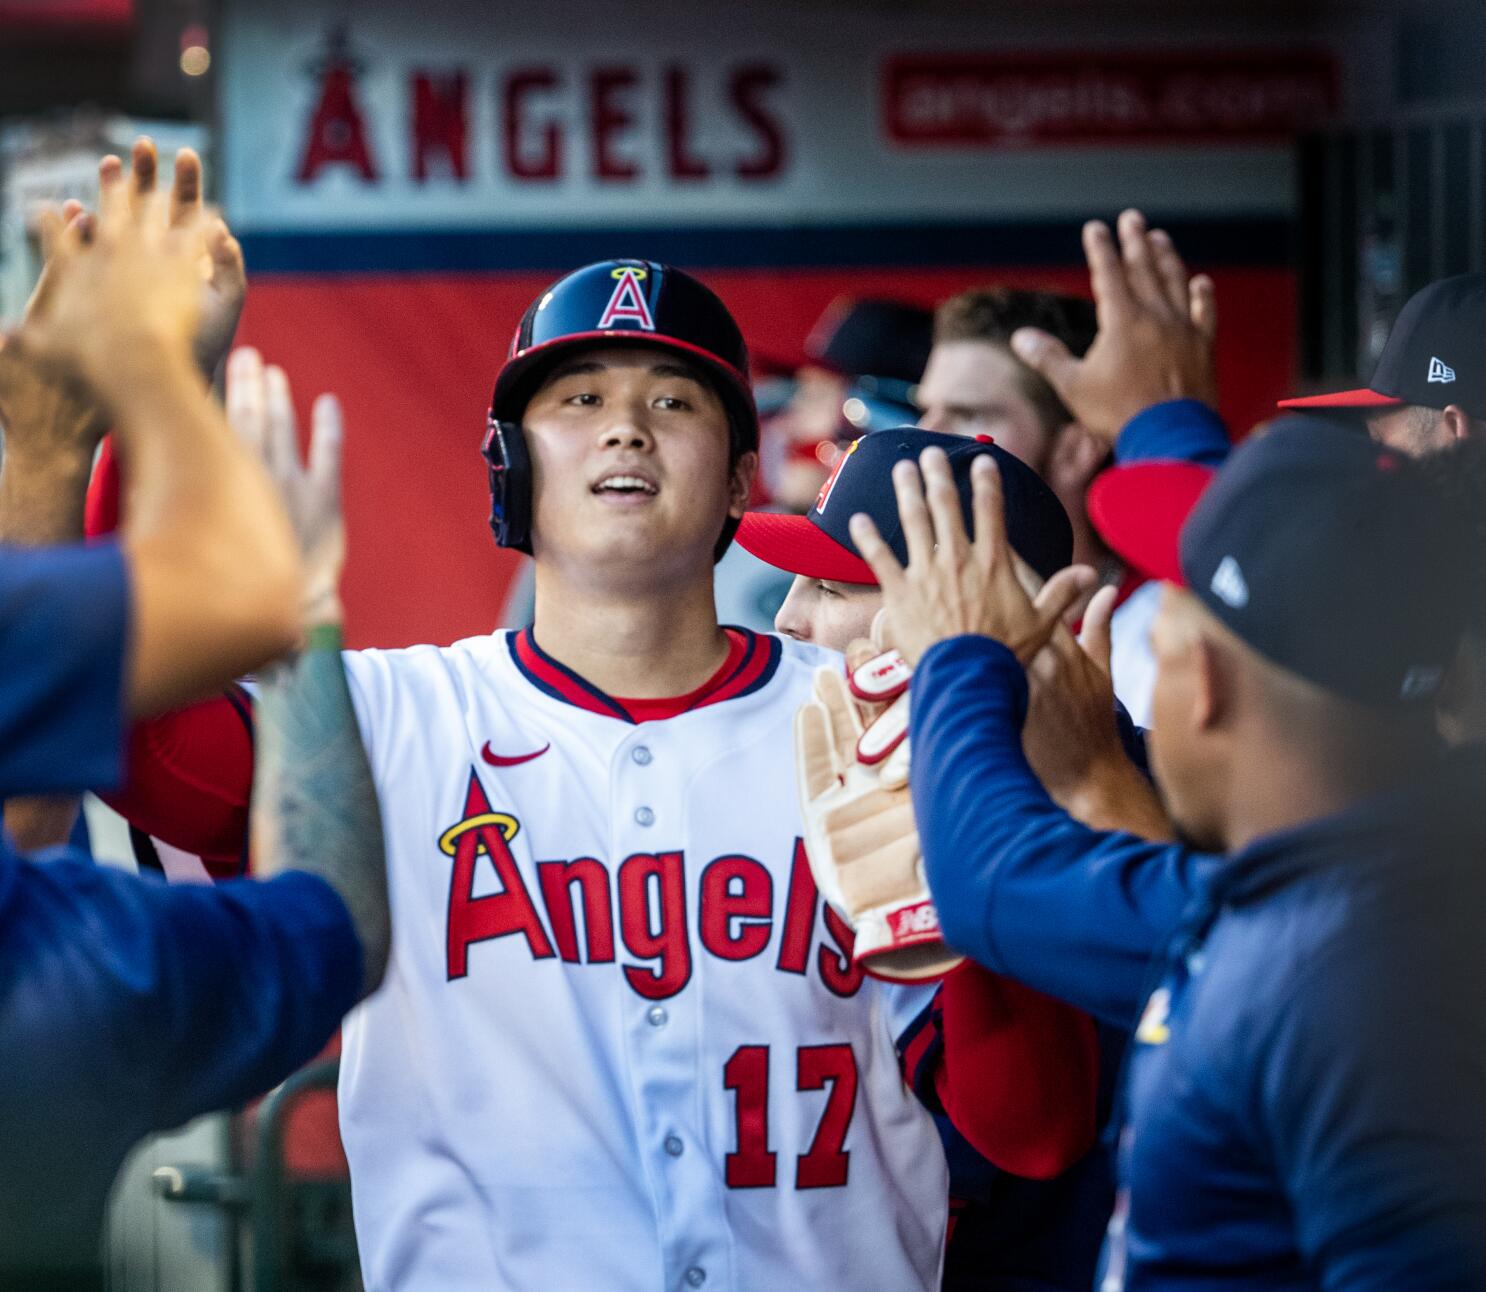 Los Angeles Angels Invited 38 Non-Rostered Players to Spring